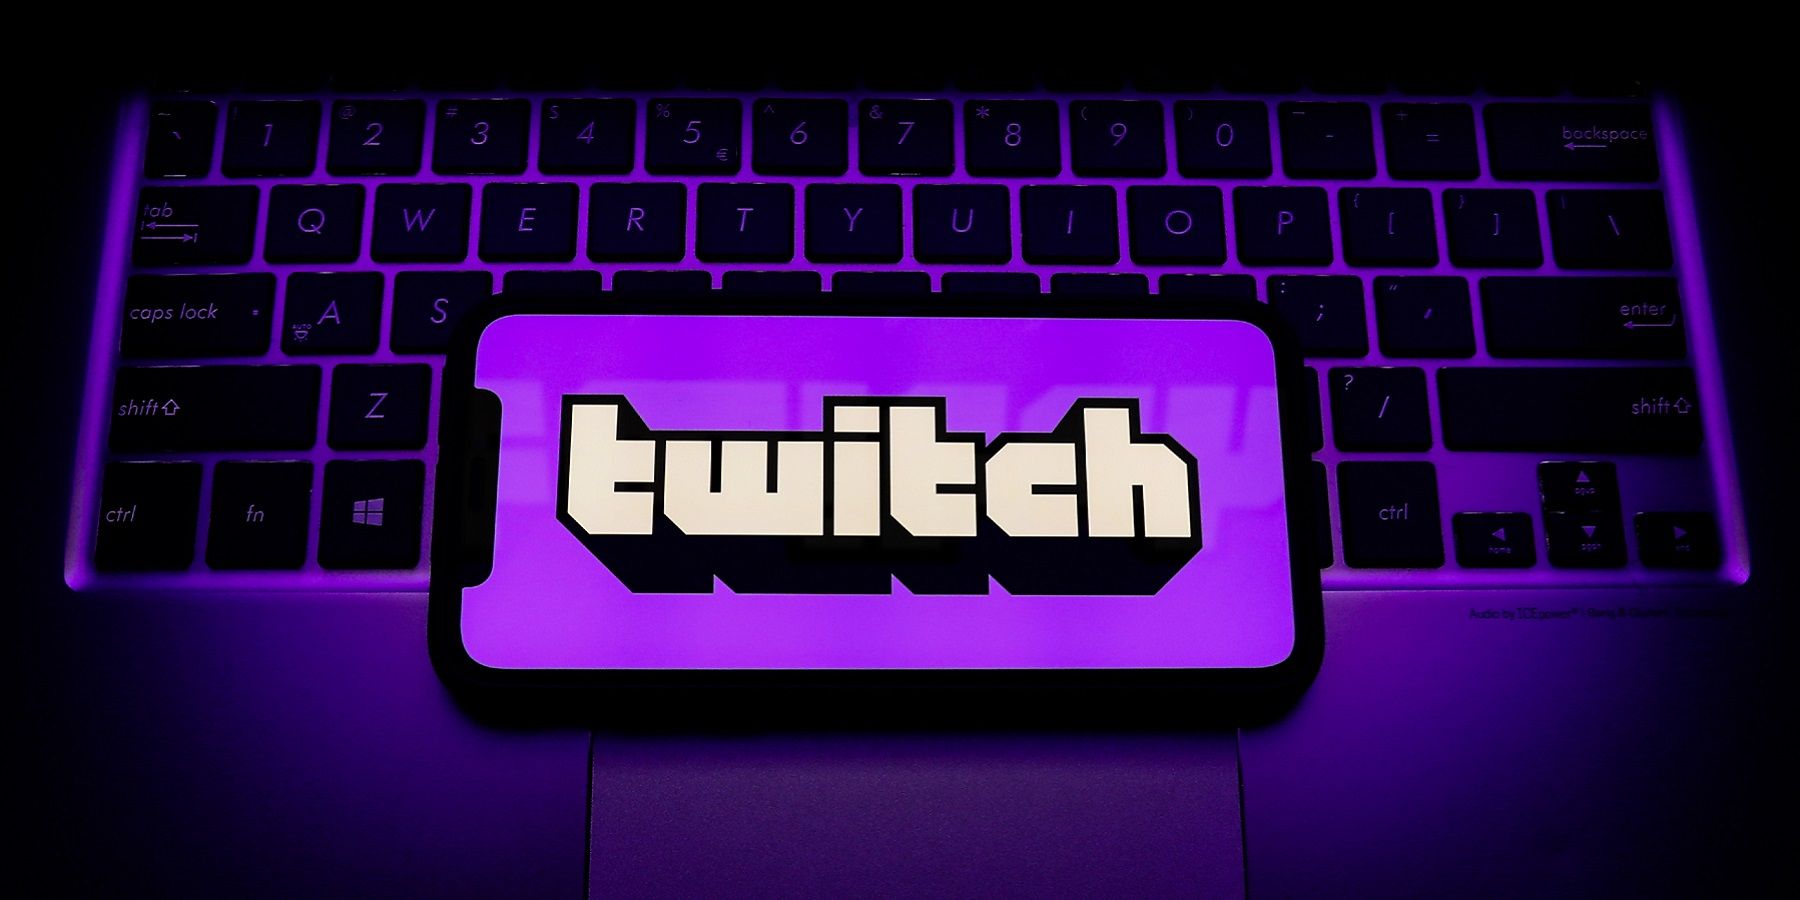 Purple tinted image showing a laptop keyboard and a phone screen over it with the Twitch logo.